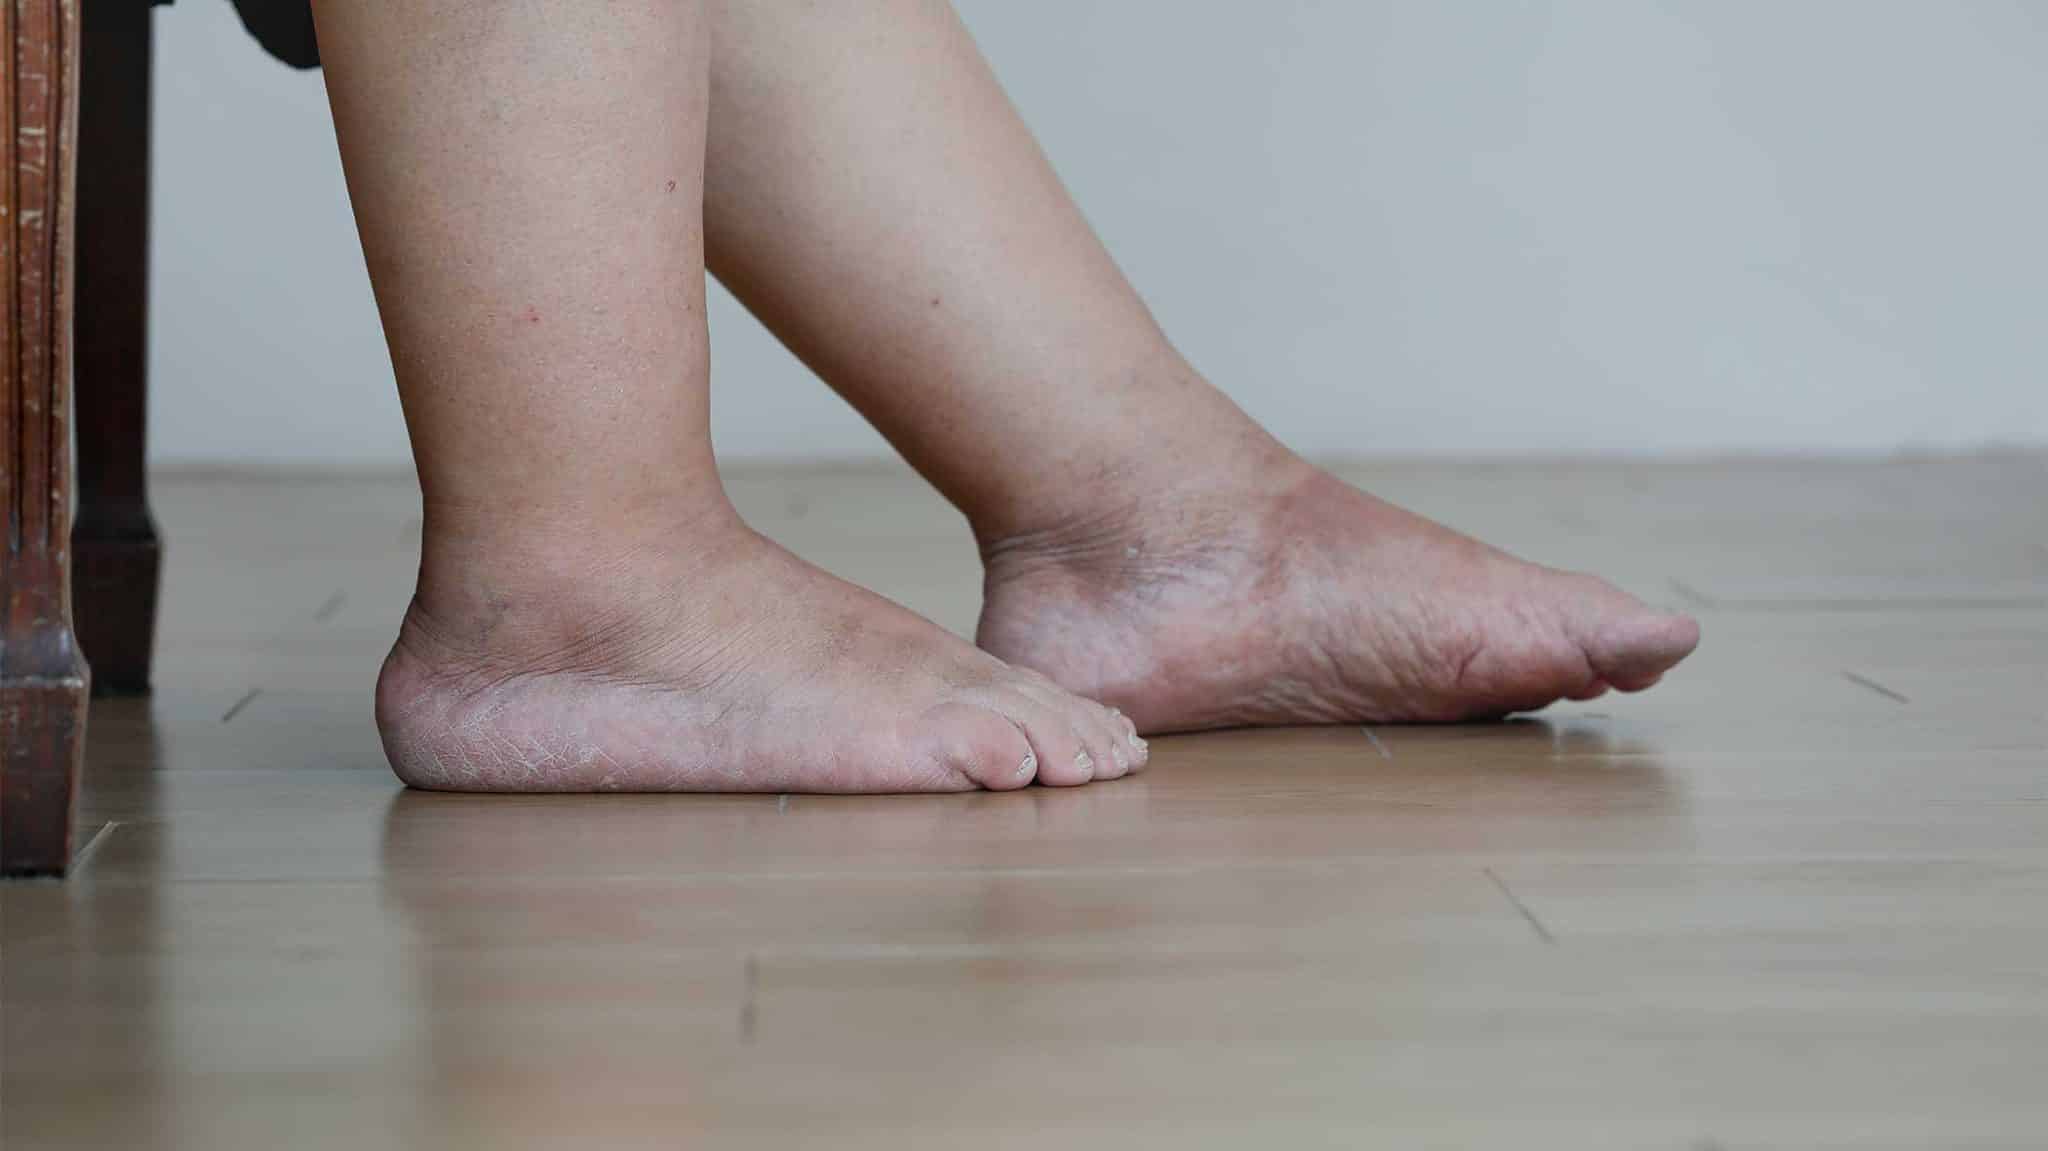 Does Alcohol Cause Swelling in Feet?